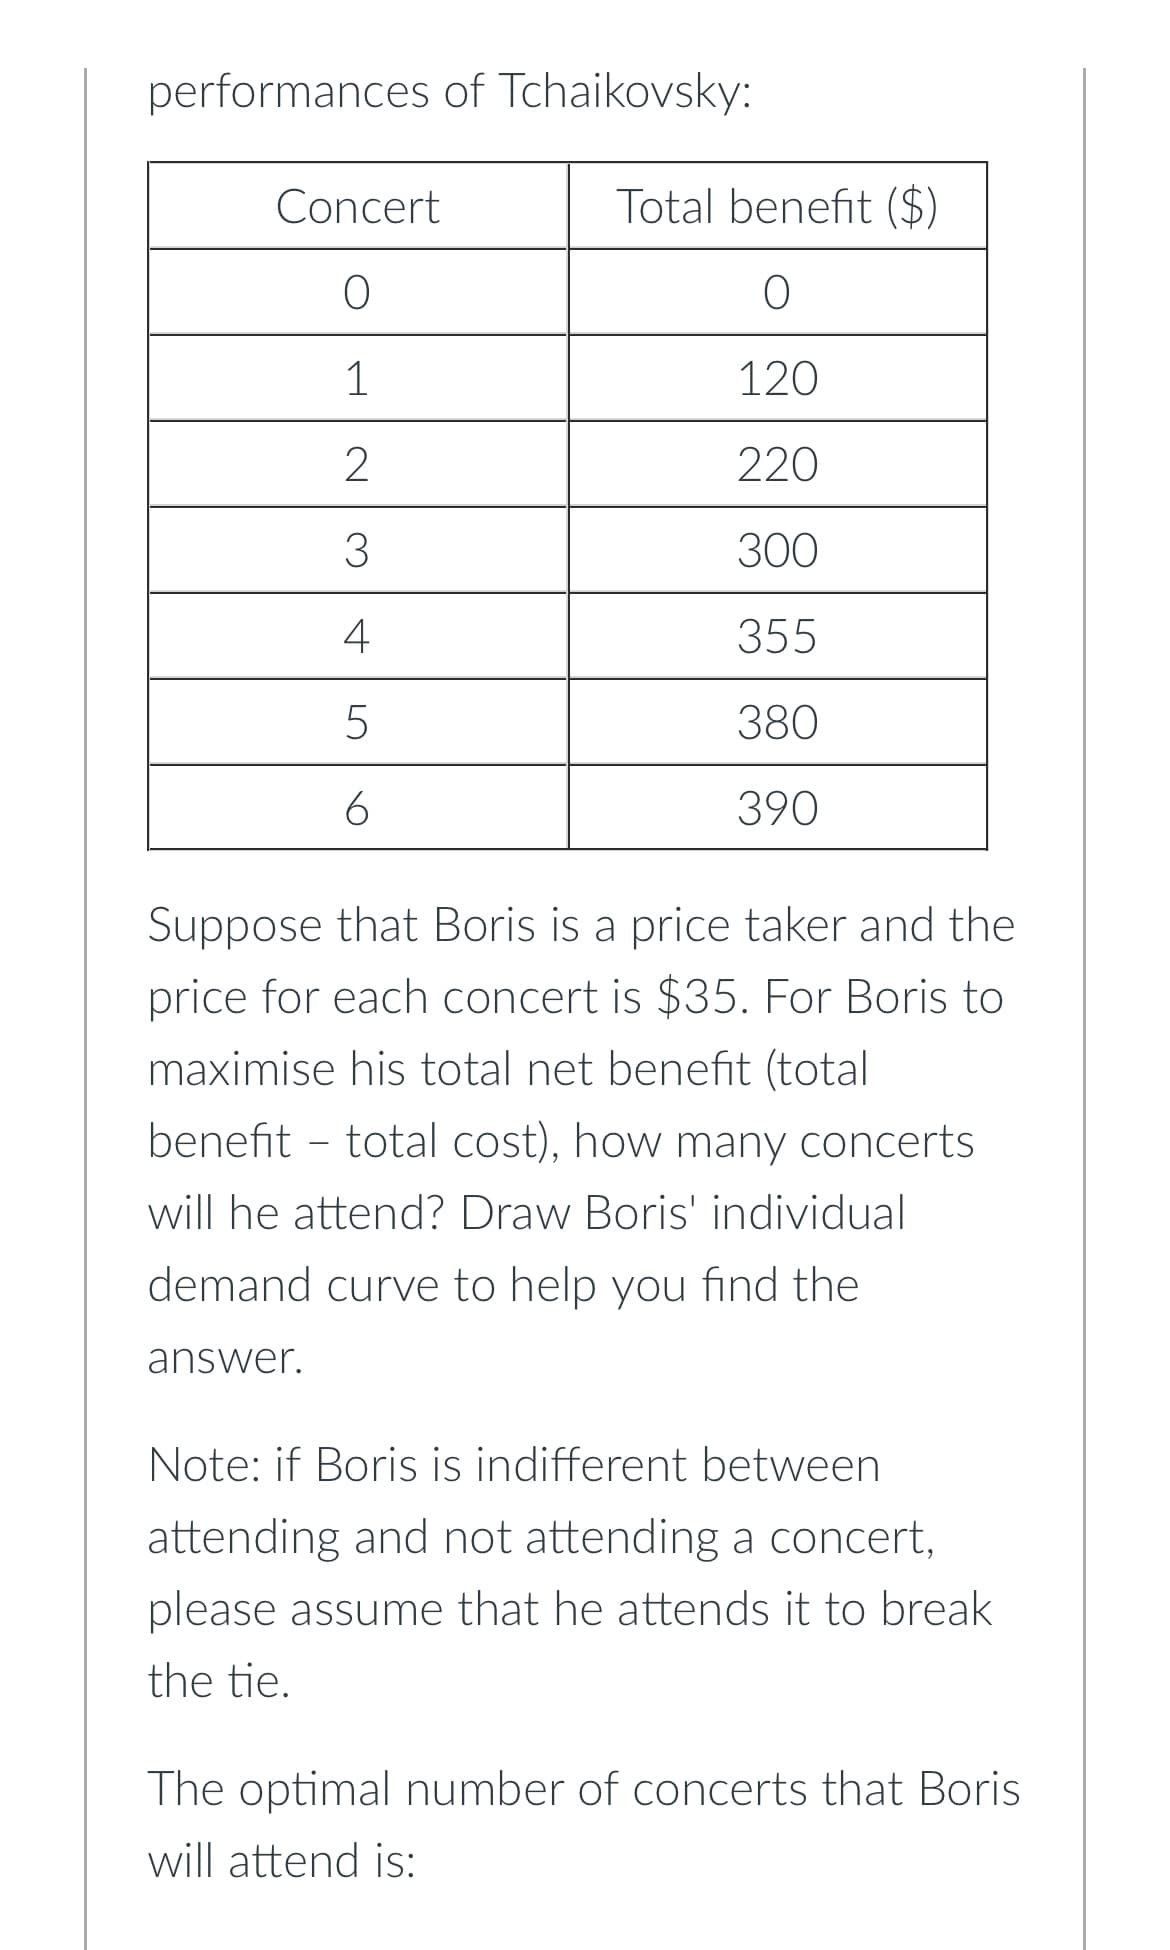 performances of Tchaikovsky:
Concert
O
1
2
3
4
5
6
Total benefit ($)
O
120
220
300
355
380
390
Suppose that Boris is a price taker and the
price for each concert is $35. For Boris to
maximise his total net benefit (total
benefit - total cost), how many concerts
will he attend? Draw Boris' individual
demand curve to help you find the
answer.
Note: if Boris is indifferent between
attending and not attending a concert,
please assume that he attends it to break
the tie.
The optimal number of concerts that Boris
will attend is: